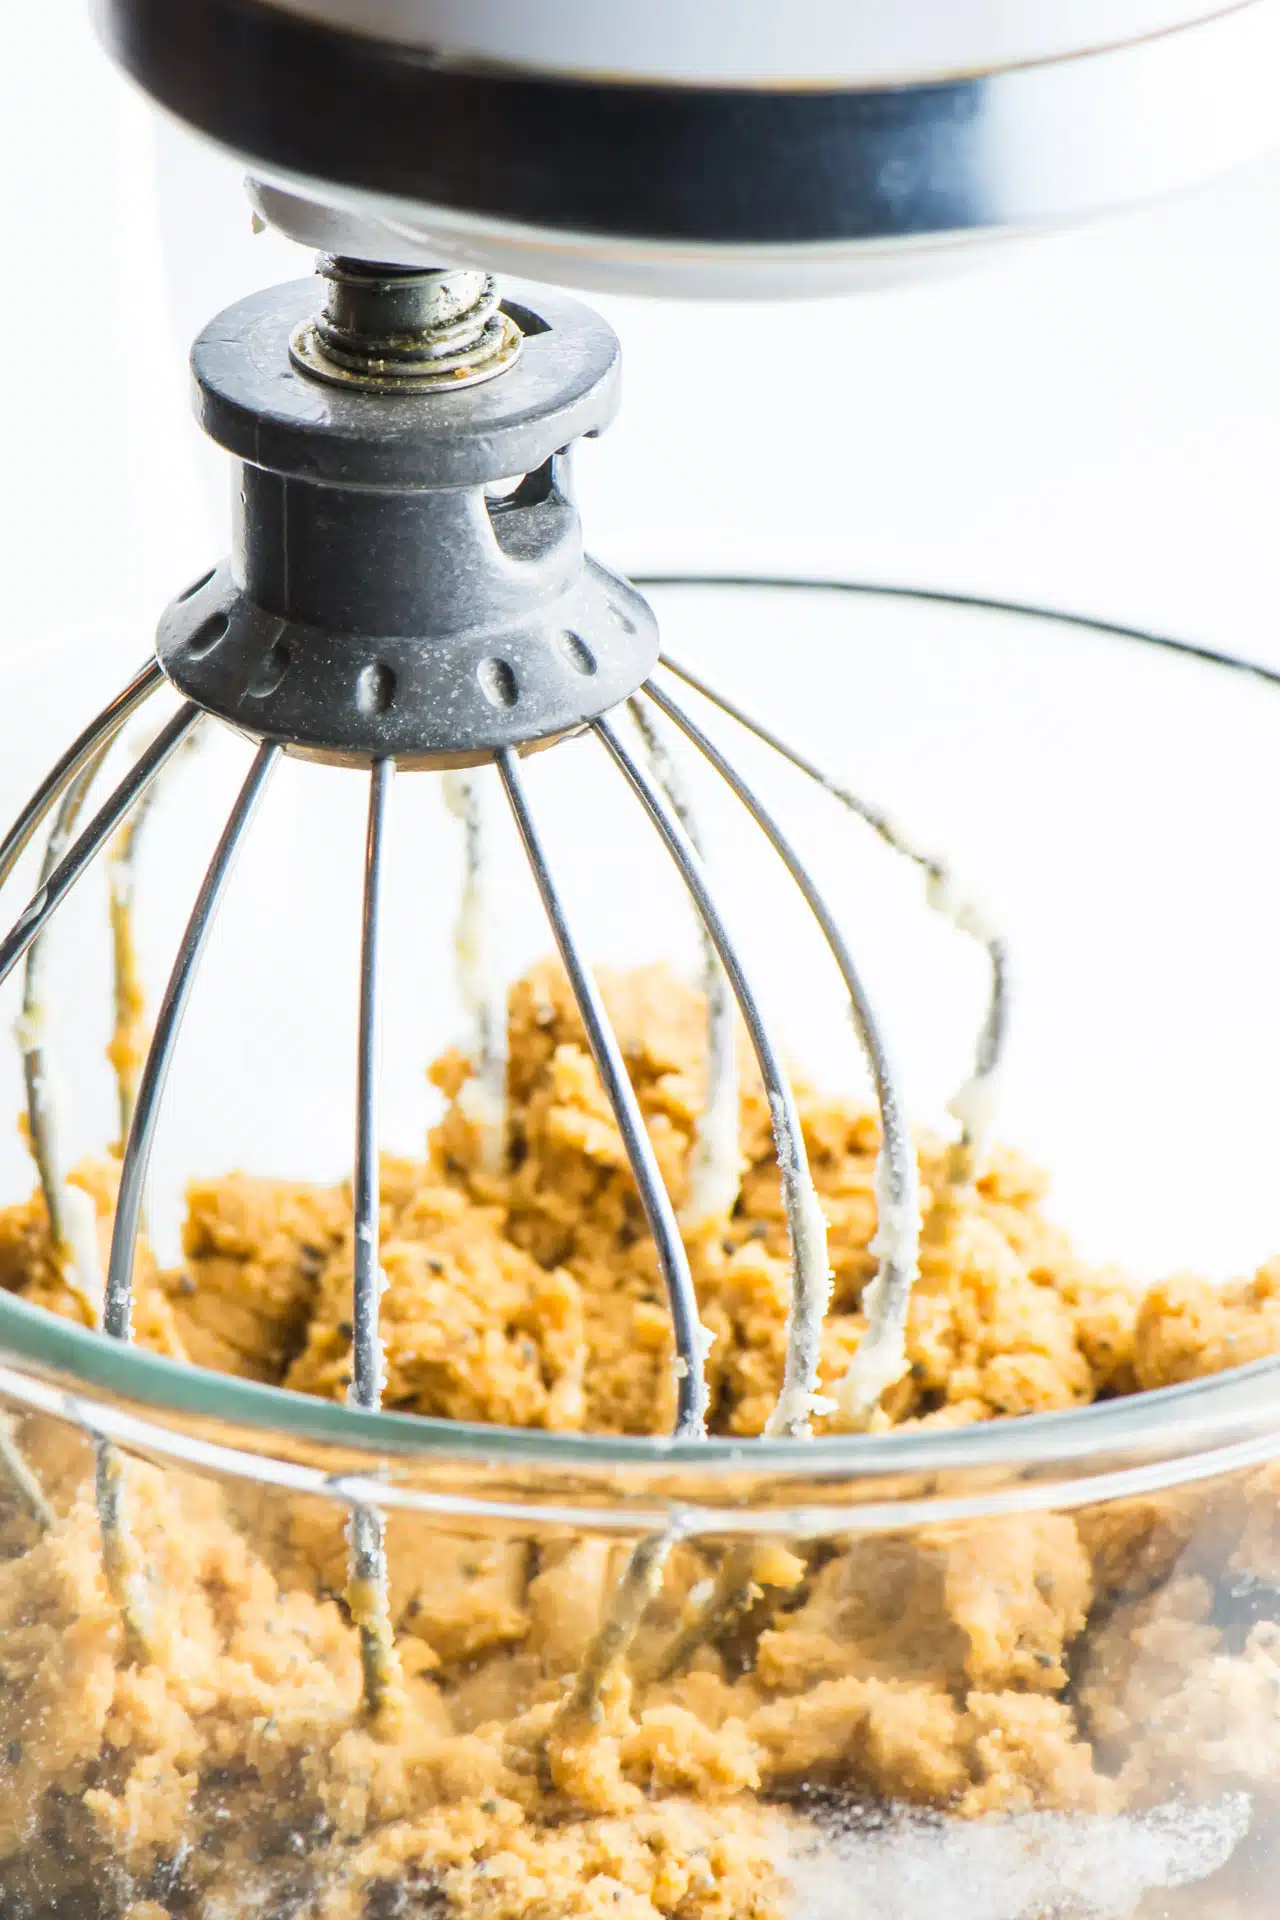 A stand mixer is full of peanut butter cookie dough and is in a glass bowl with the basic mixer attachment.